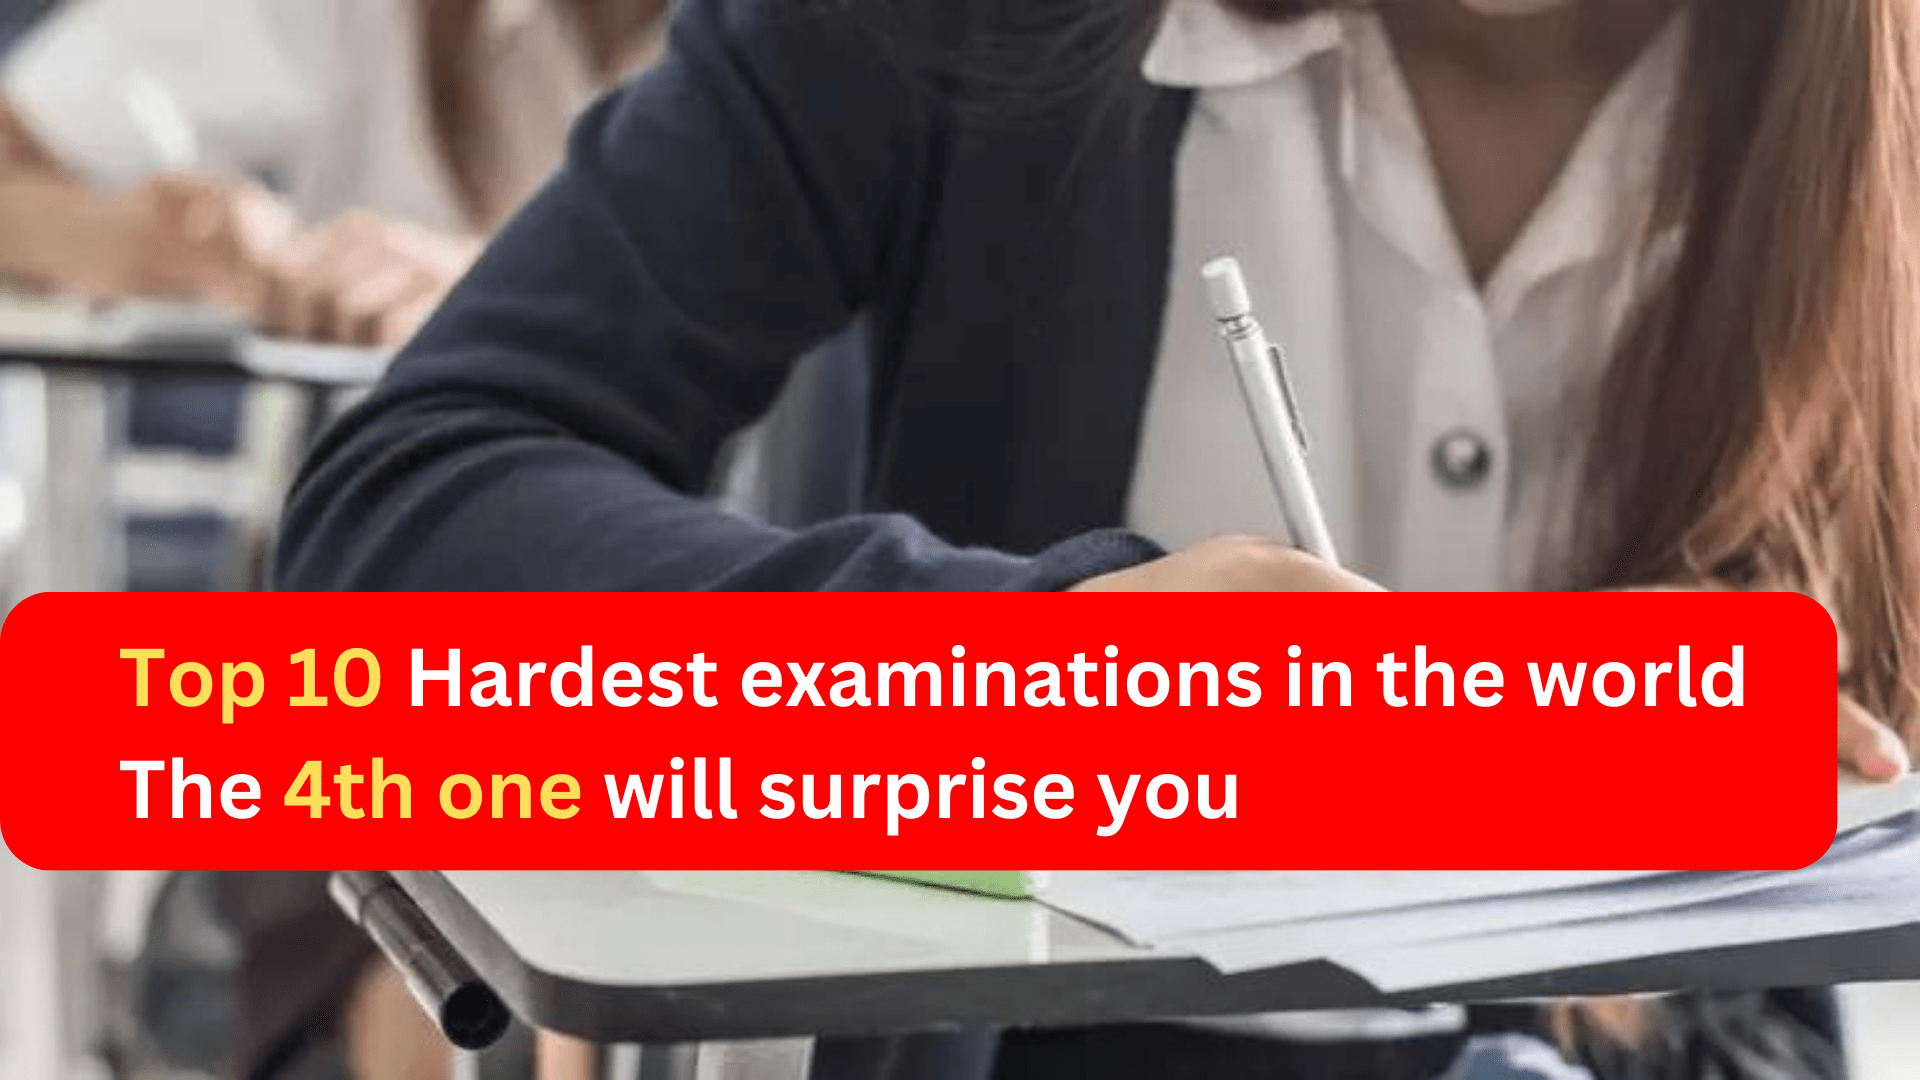 Top 10 Hardest examinations in the world